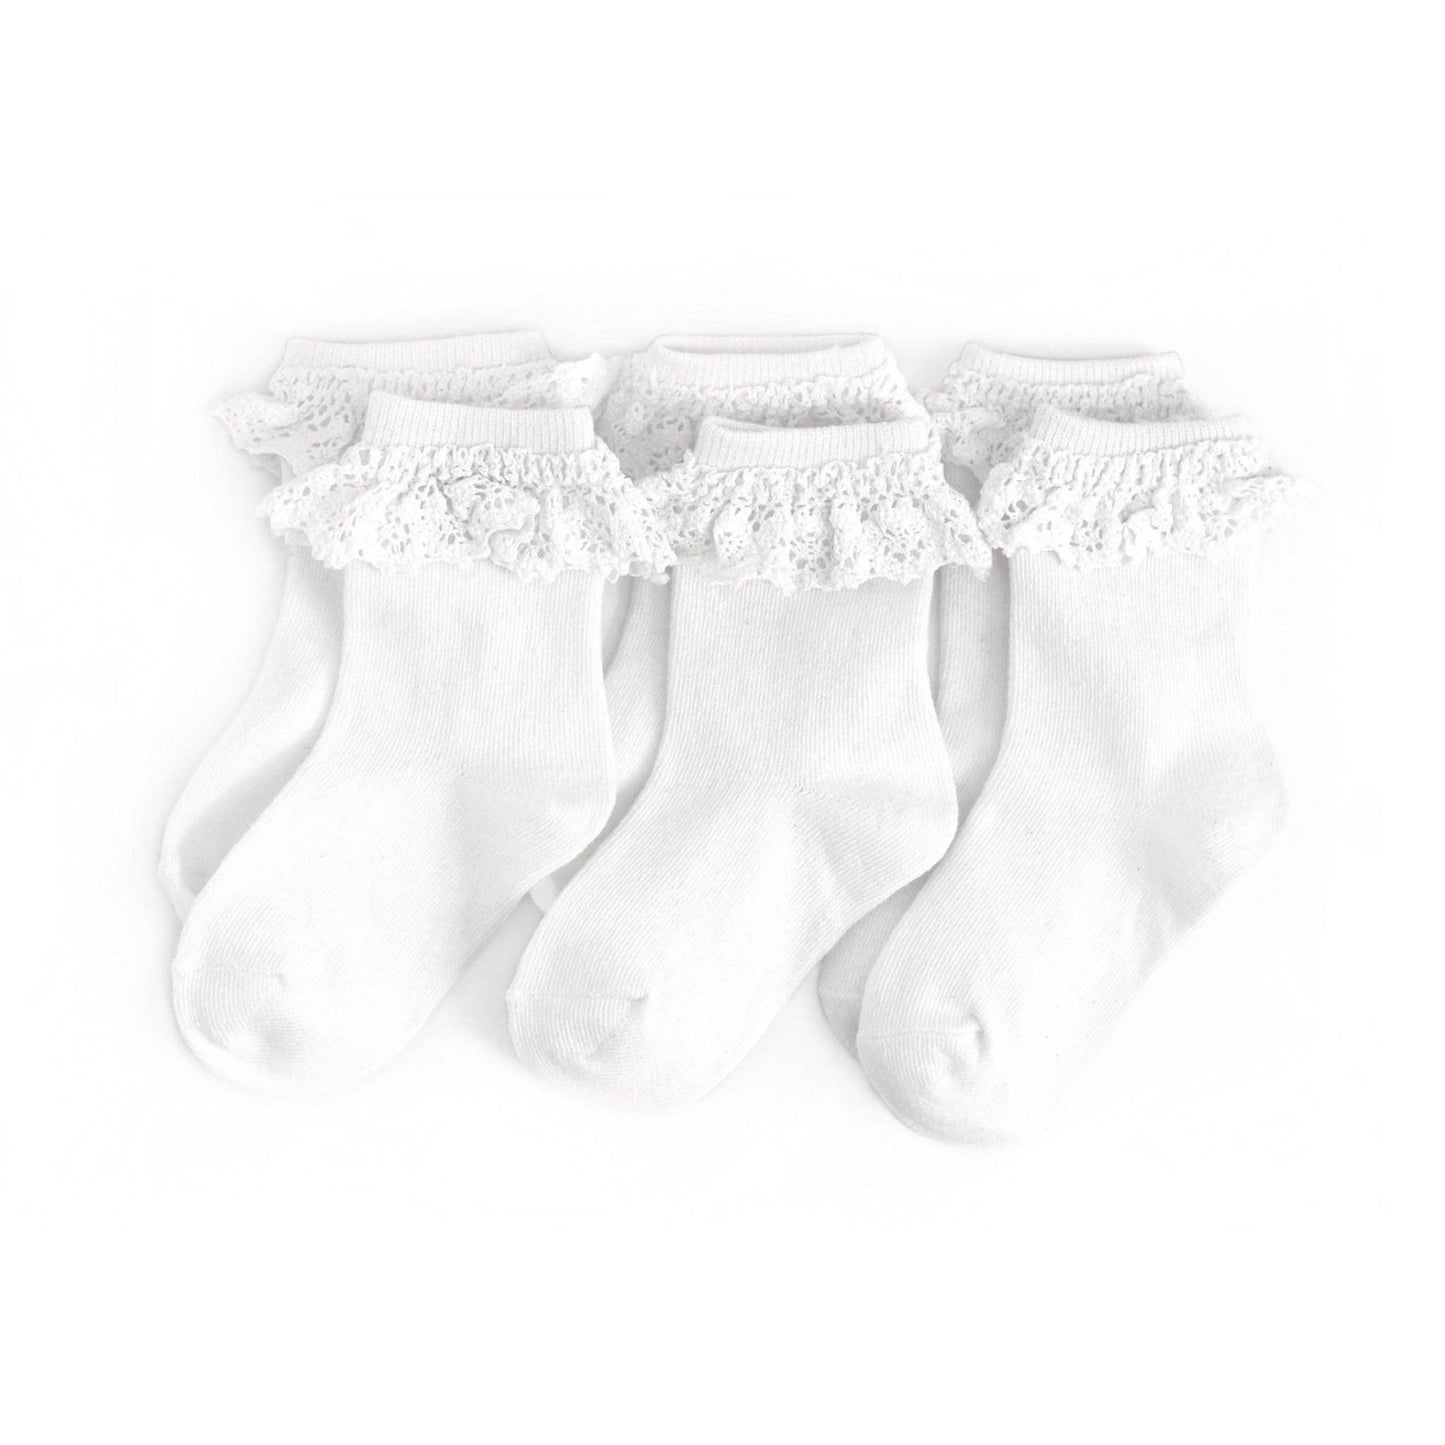 Little Stocking Co. - White Lace Midi Sock 3-Pack: 4-6 YEARS